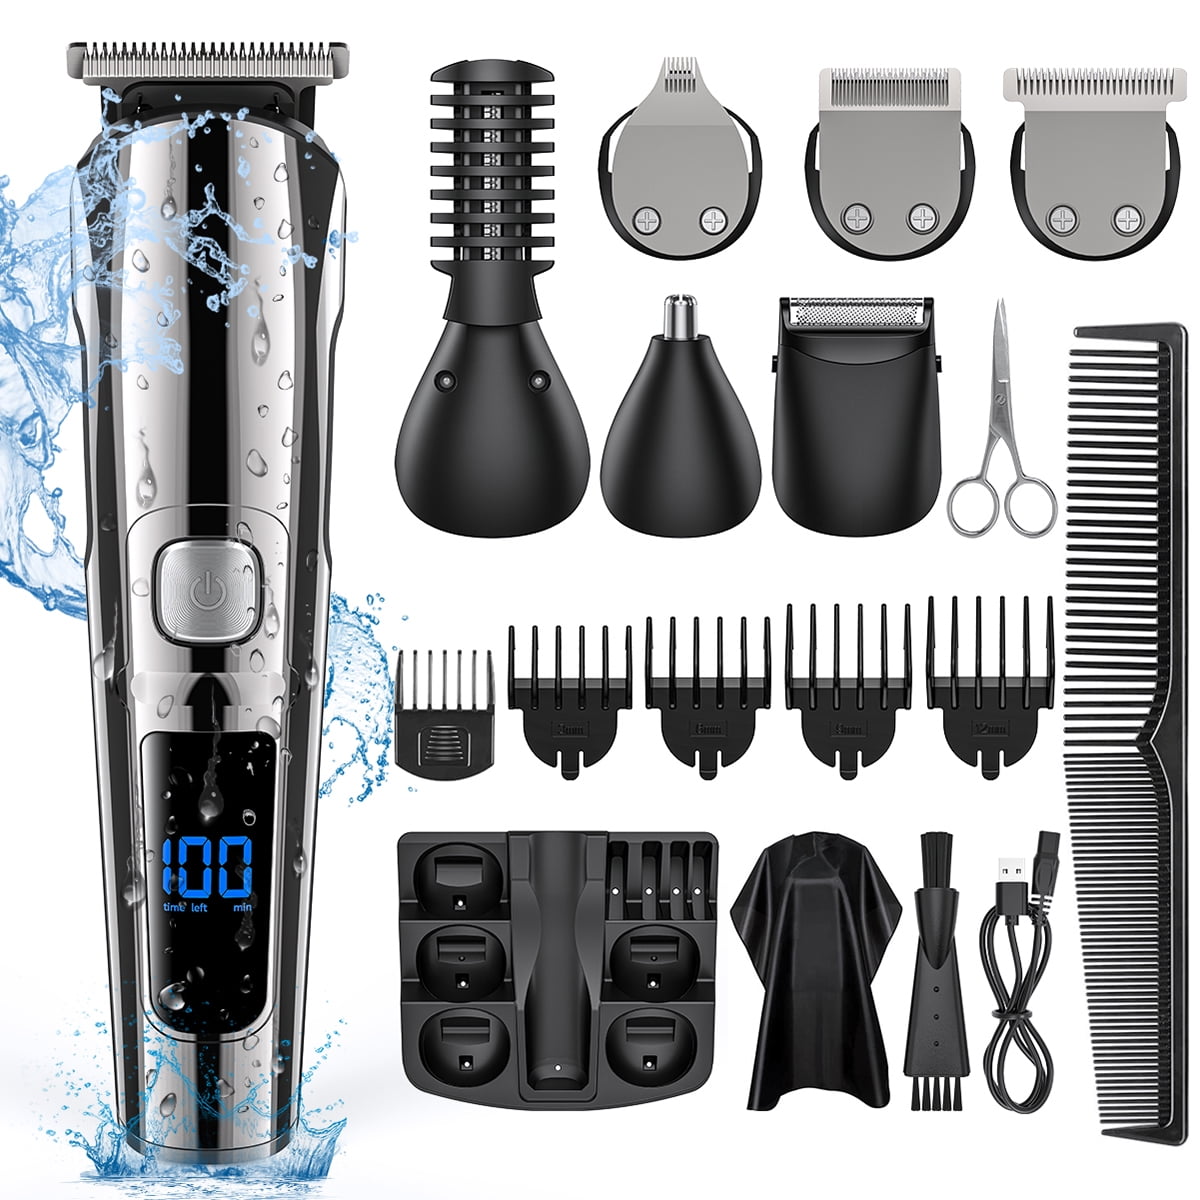 Syndicate enkel succes 15 in 1 Hair Clippers, IPX7 Hair Beard Trimmer USB Rechargeable Male  Cordless Haircut Groomer Kit - Walmart.com